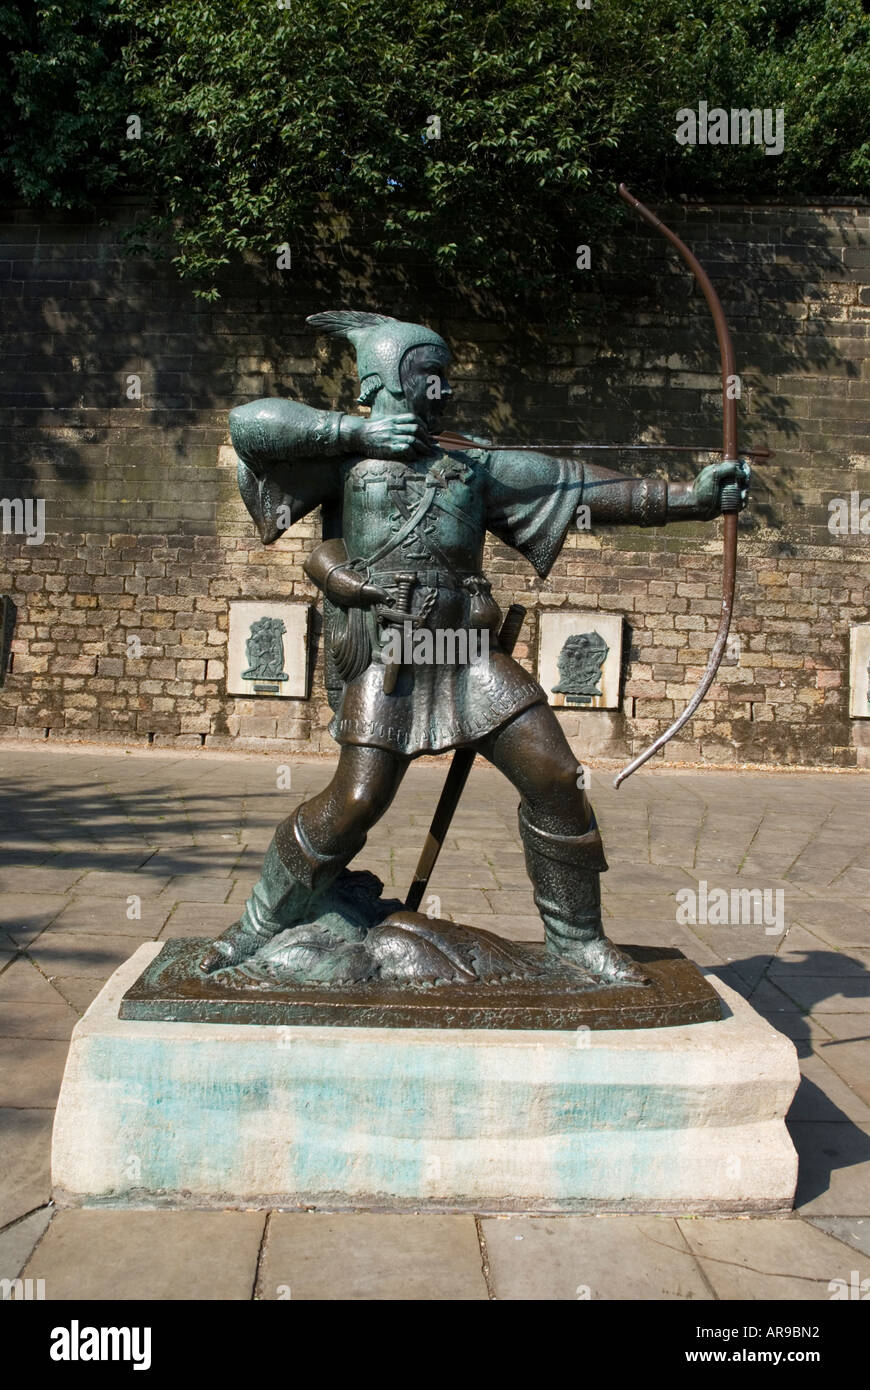 Image of Robin Hoods statue outside of Nottingham Castle in England Stock Photo